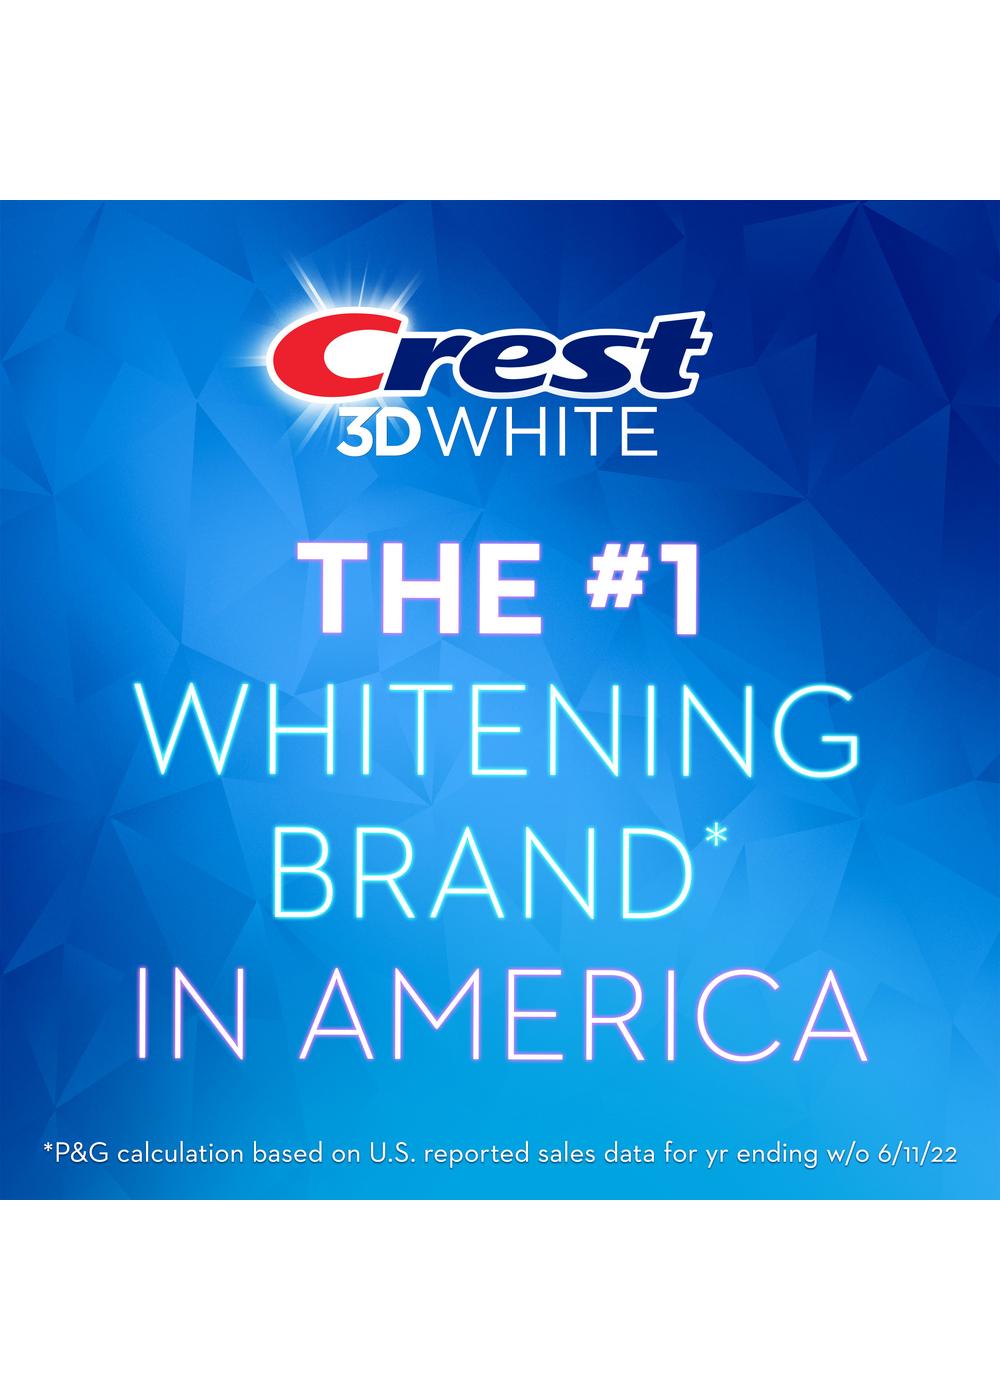 Crest 3D White Advanced Whitening Toothpaste - Express White; image 10 of 16